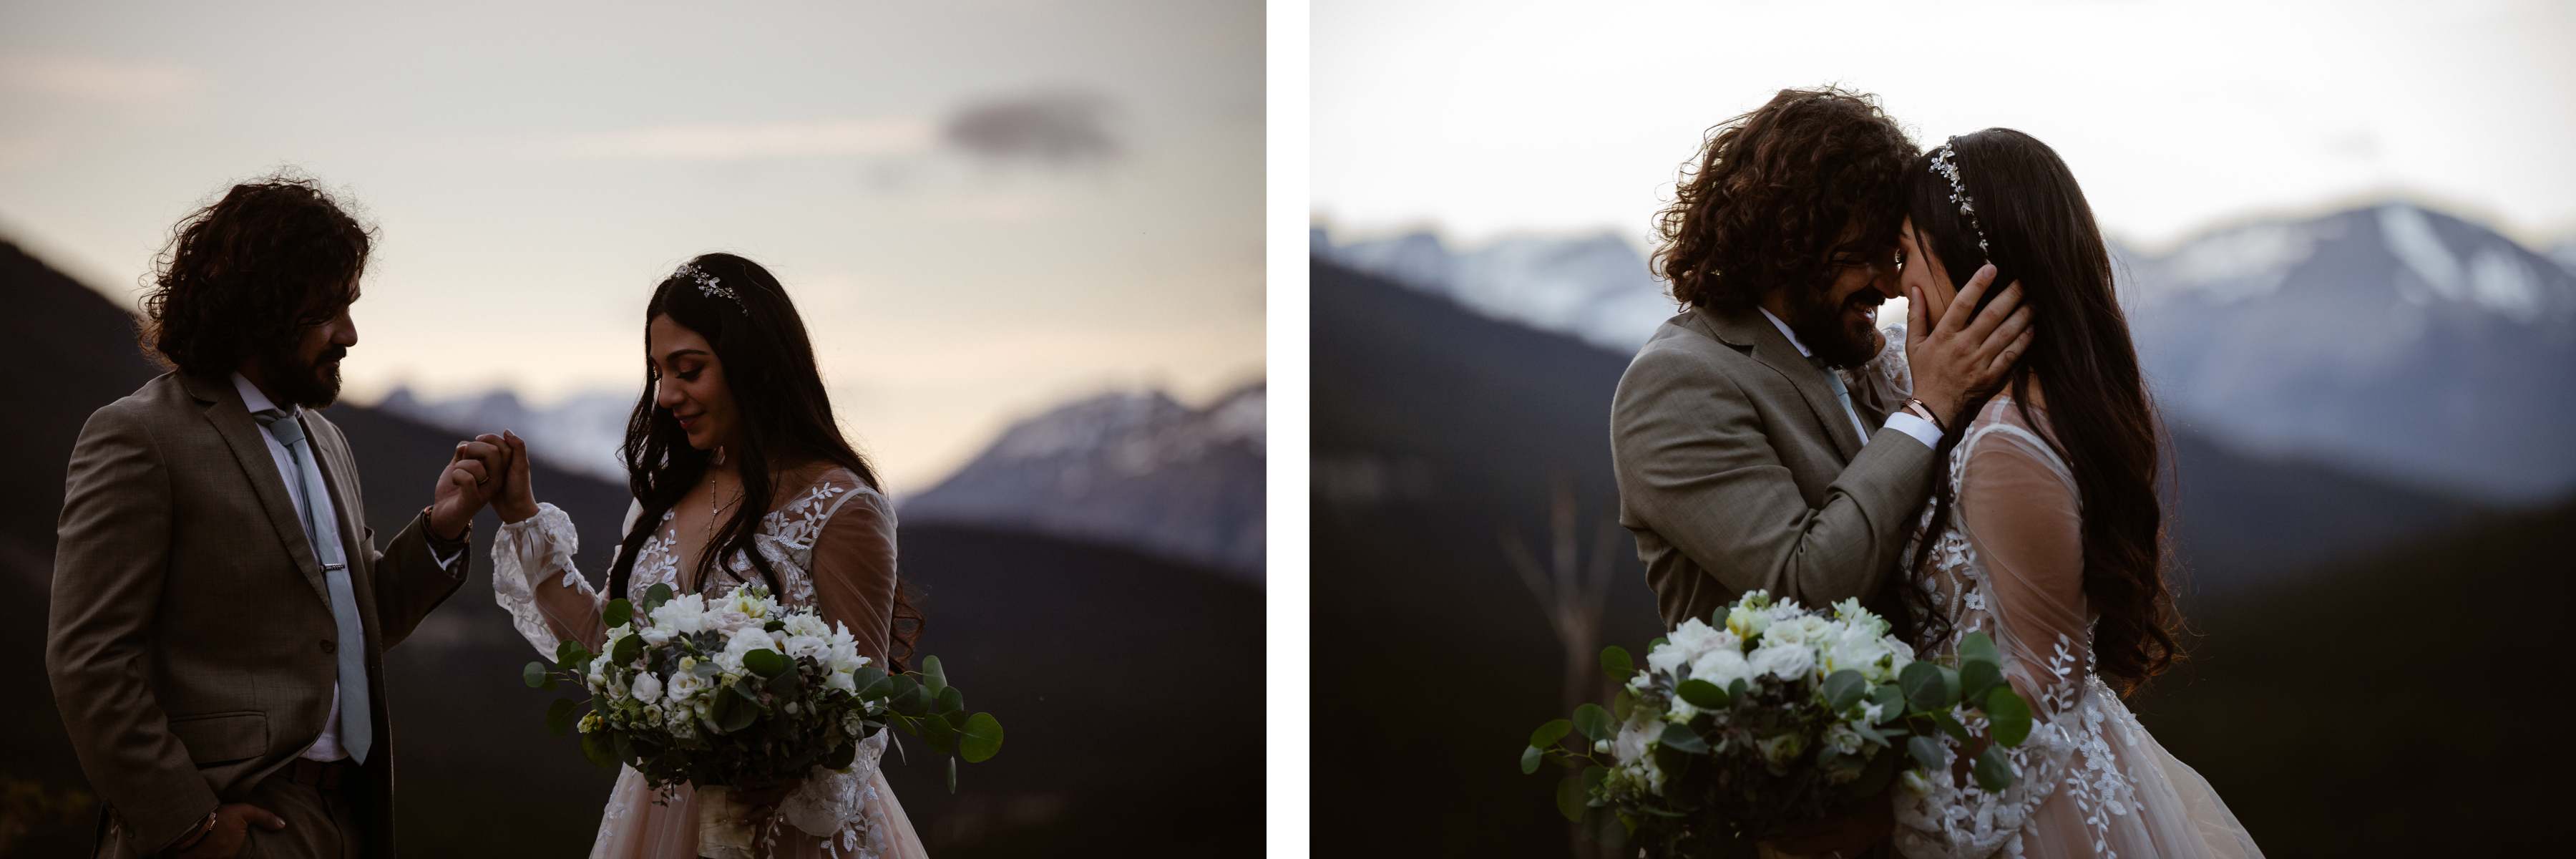 Canmore Elopement Photographers - Image 43